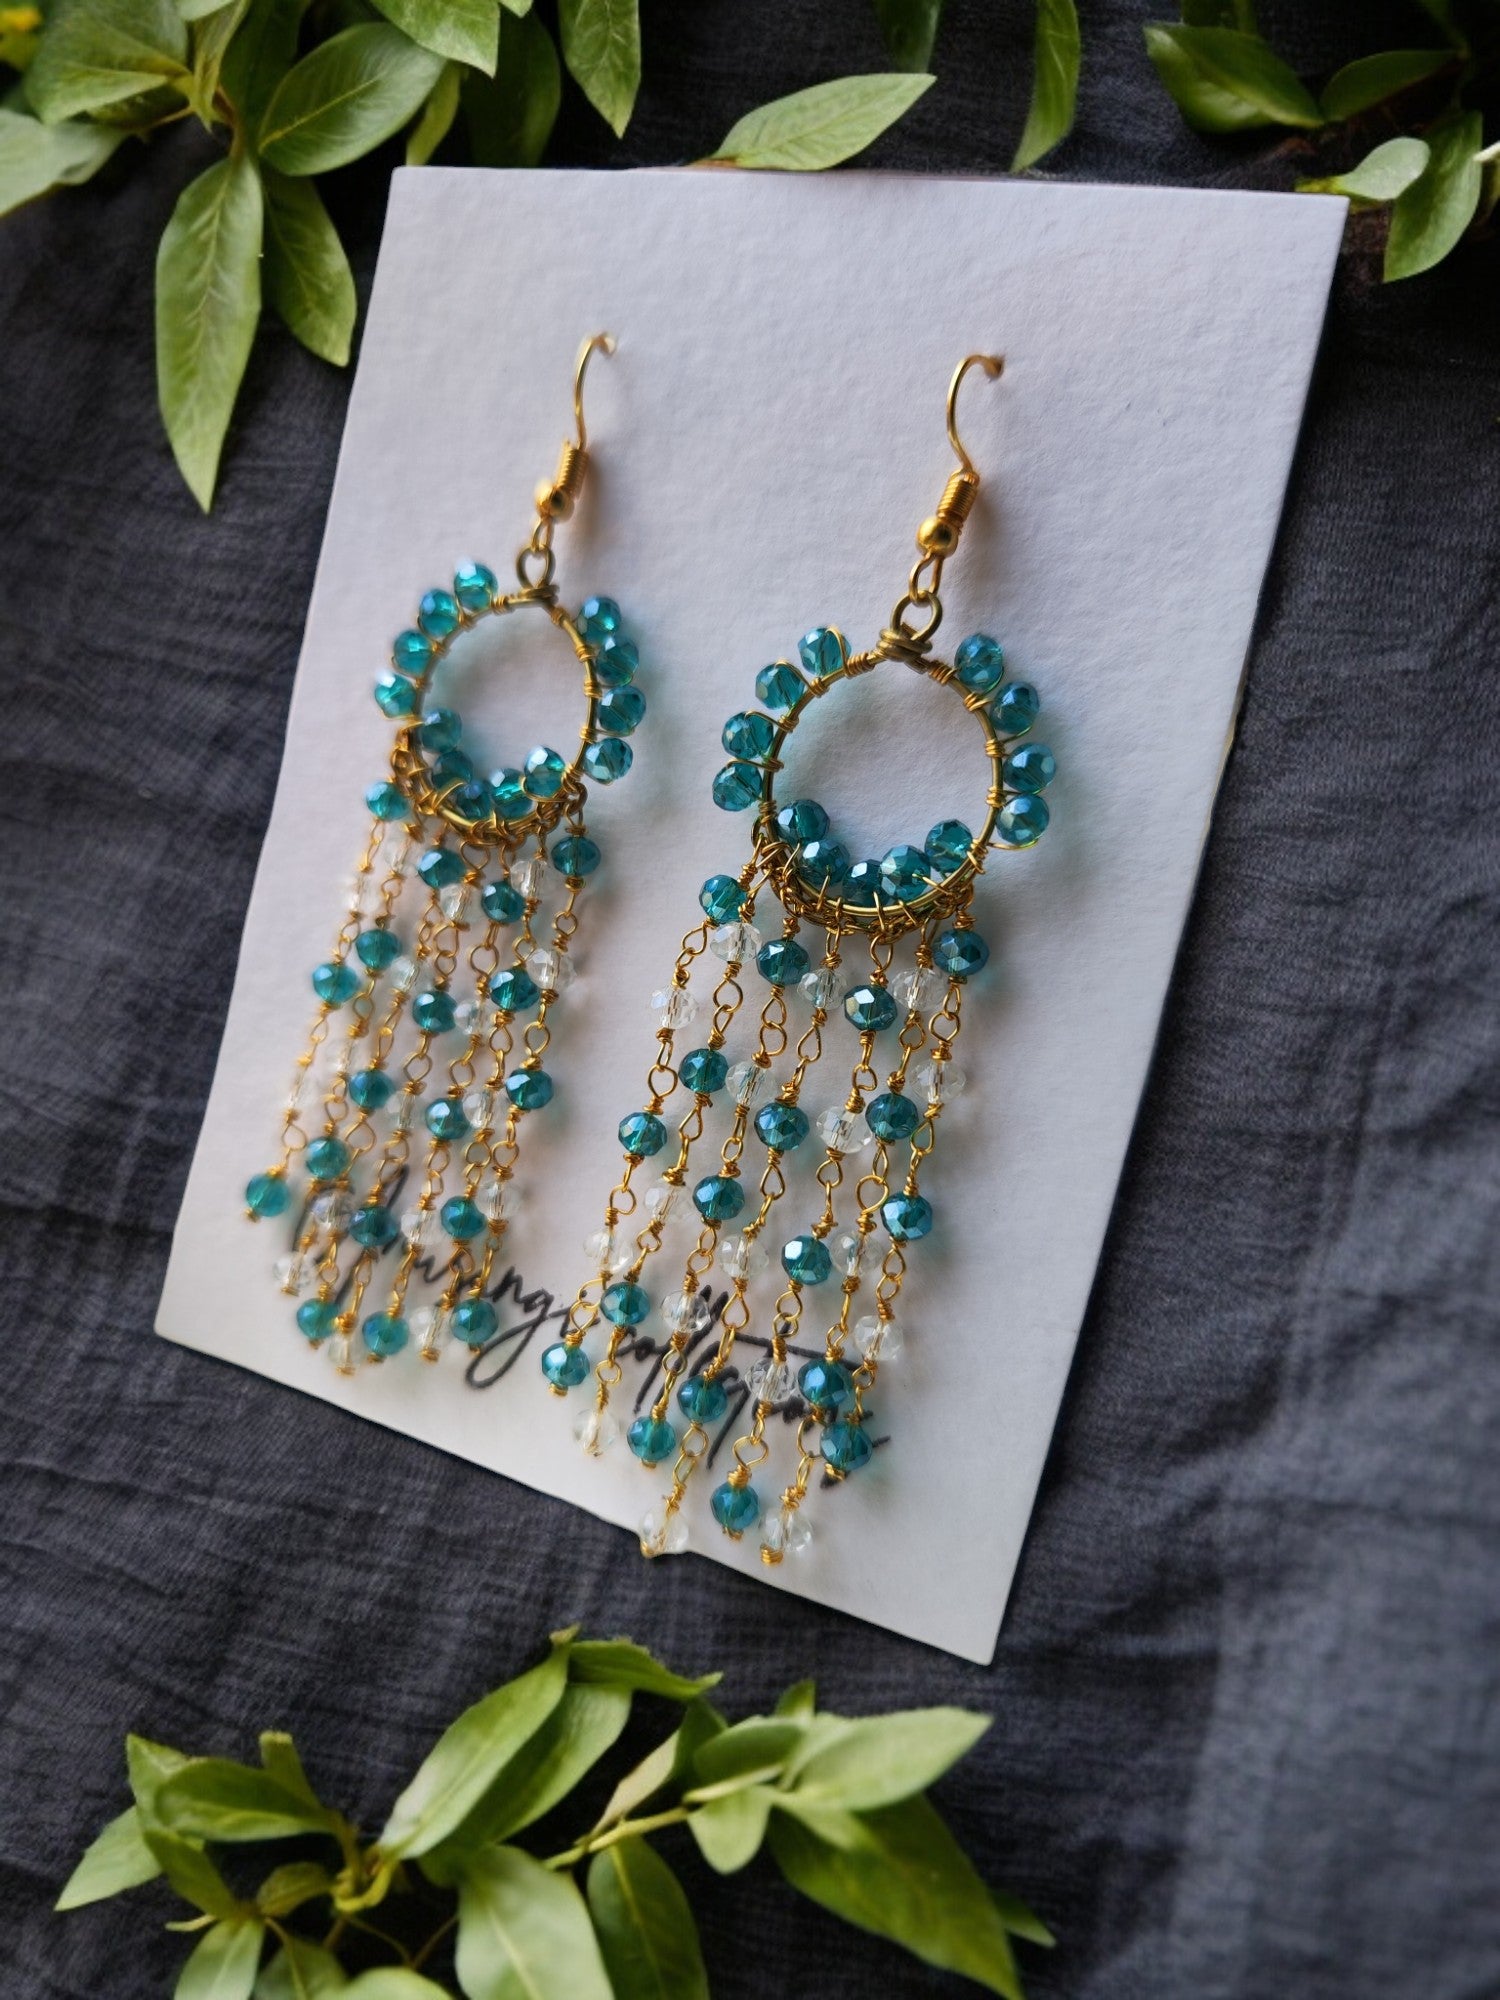 Indulge in luxury with our Eesha Beaded Earrings. Handcrafted with care, these sea blue and white beaded earrings are a stunning display of intricate design. The long length adds sophistication to any outfit, making these a must-have in your jewelry collection. Make a statement and elevate your look with these unique and eye-catching earrings.